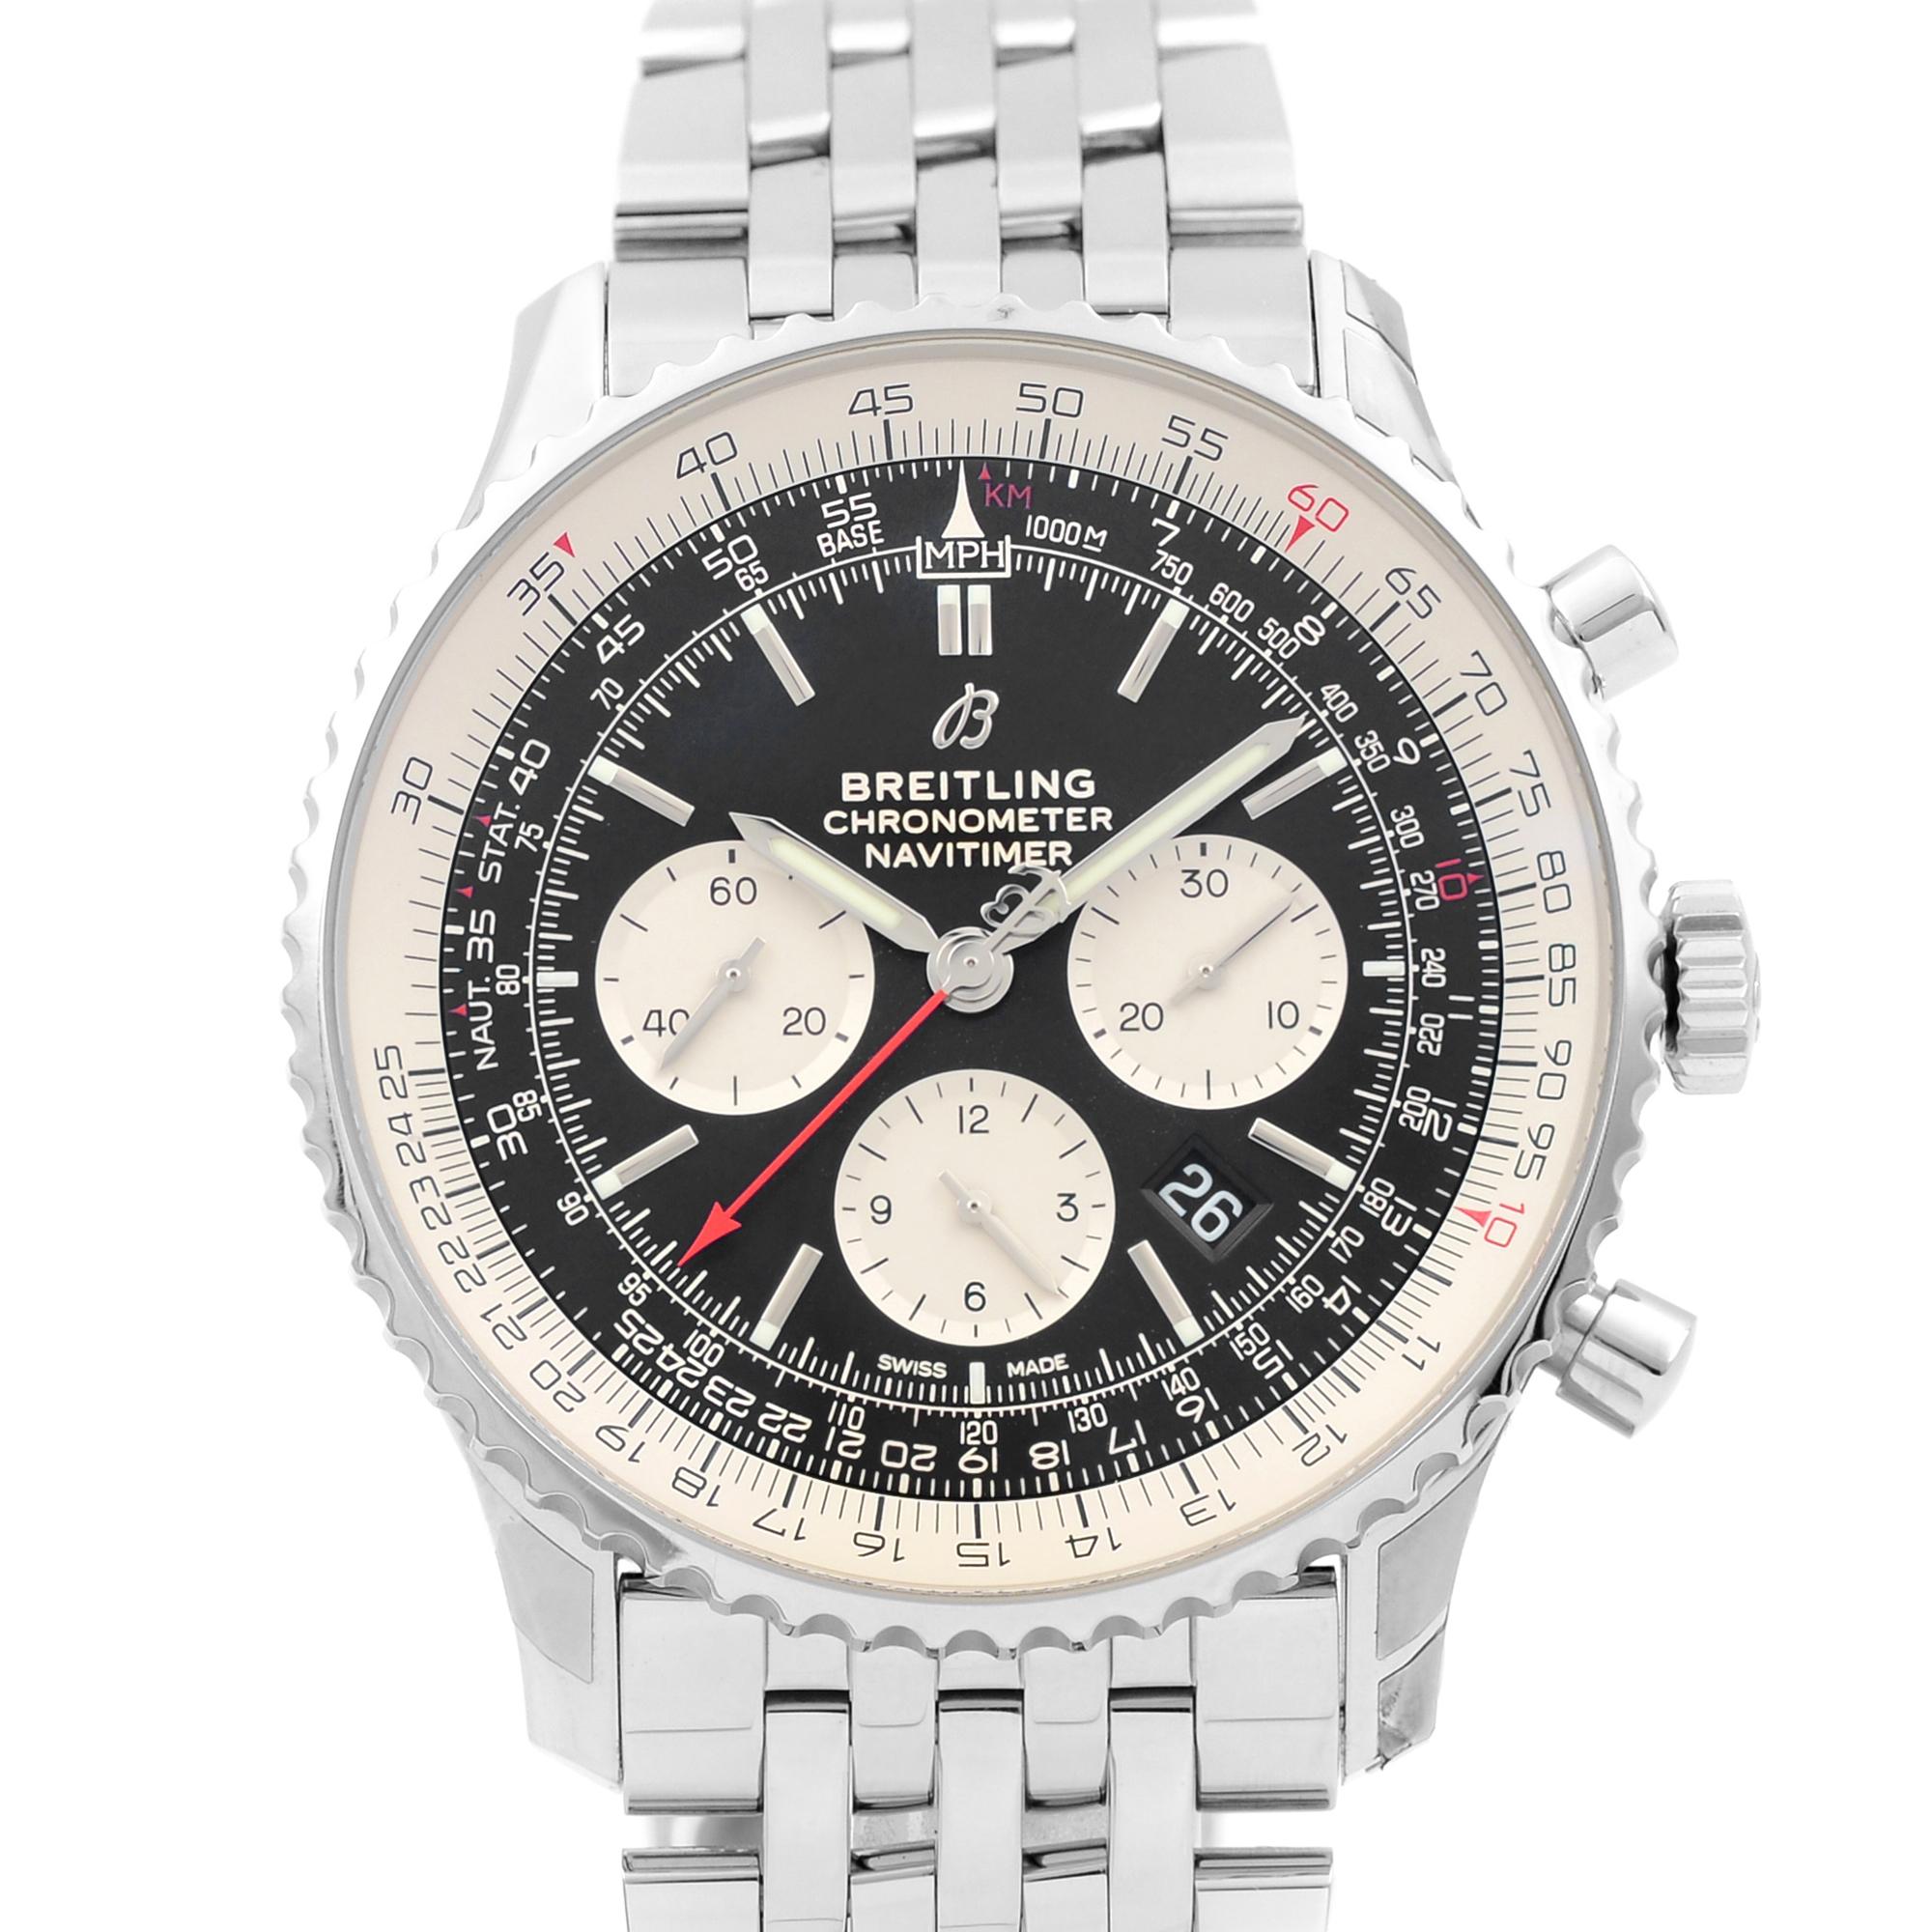 Store Display Model Never Worn. Can have minor blemishes or Missing tags and Stickers. Comes with an Original Box and Chronostore Authentication Certificate. Covered by a 3-year Chronostore warranty. 
Details:
MSRP 9450
Brand Breitling
Department